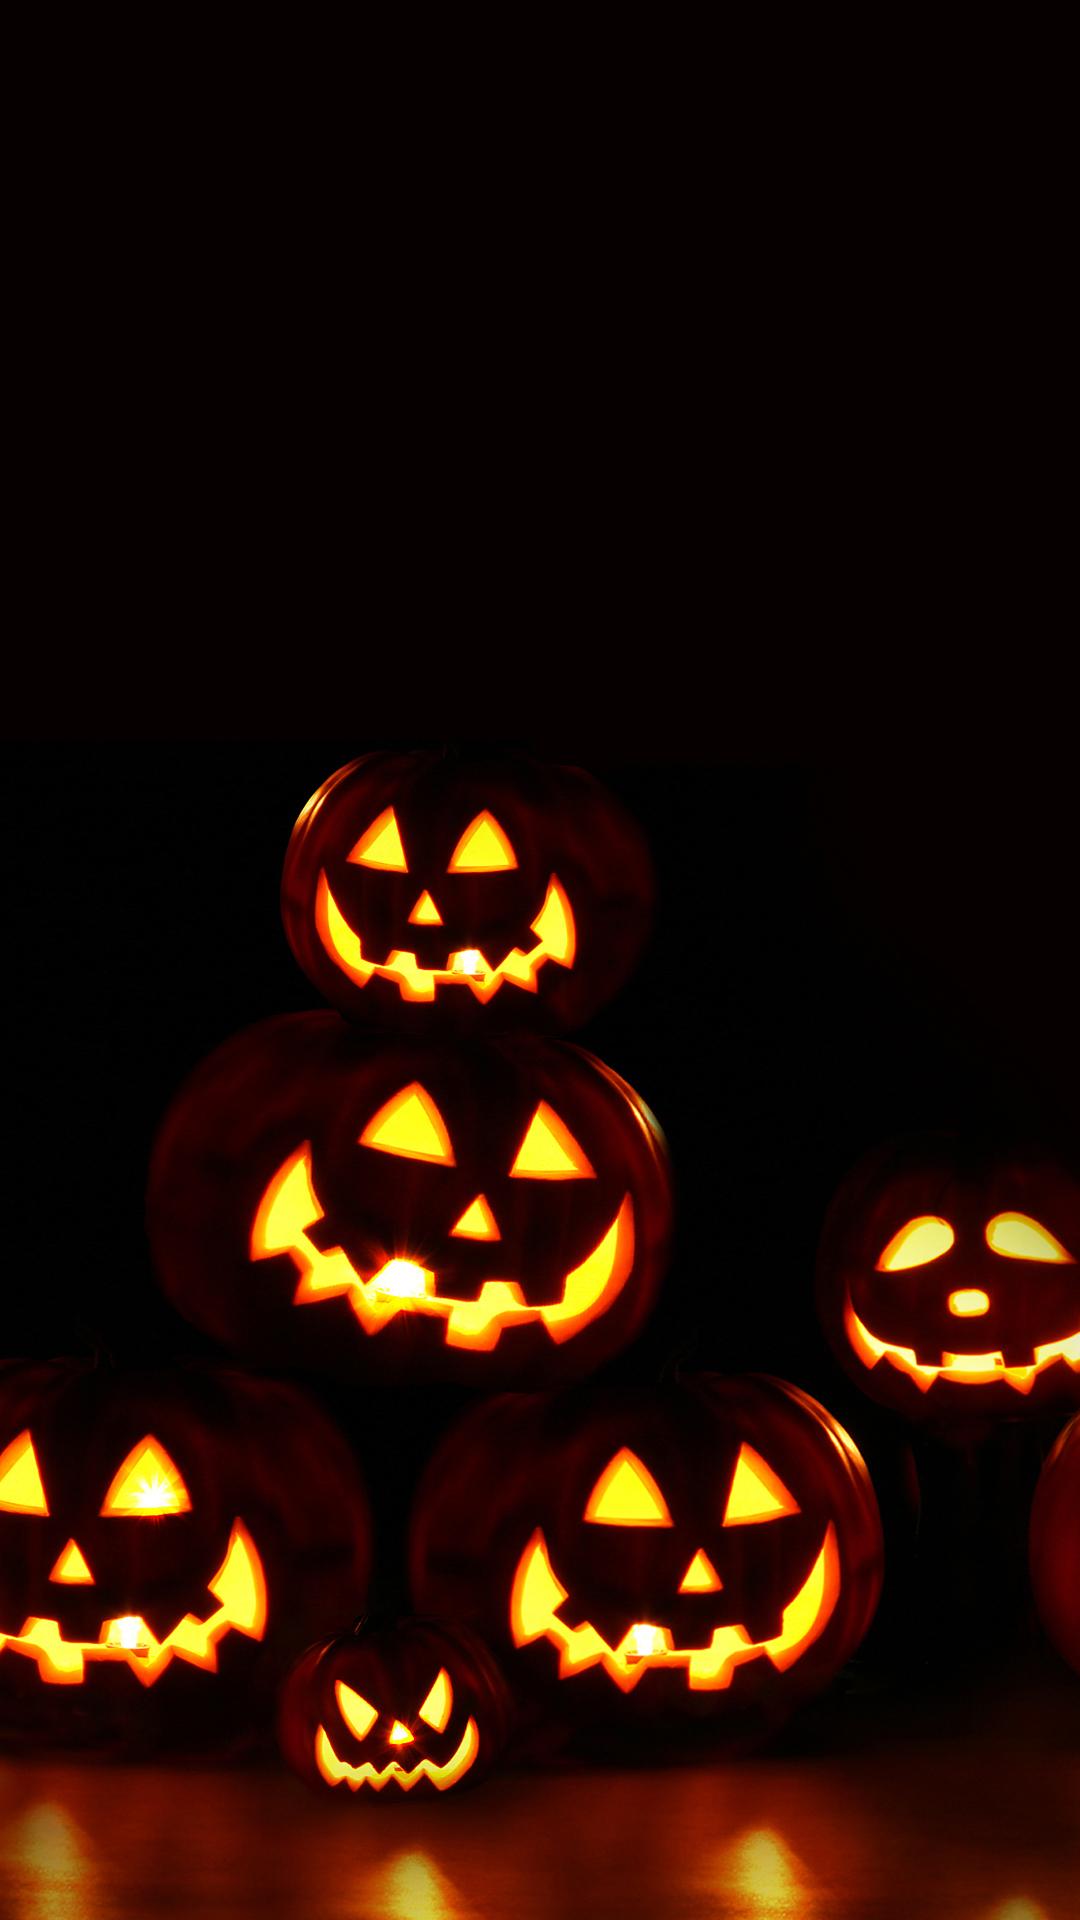 Scary Pumpkins Halloween Android Wallpaper free download